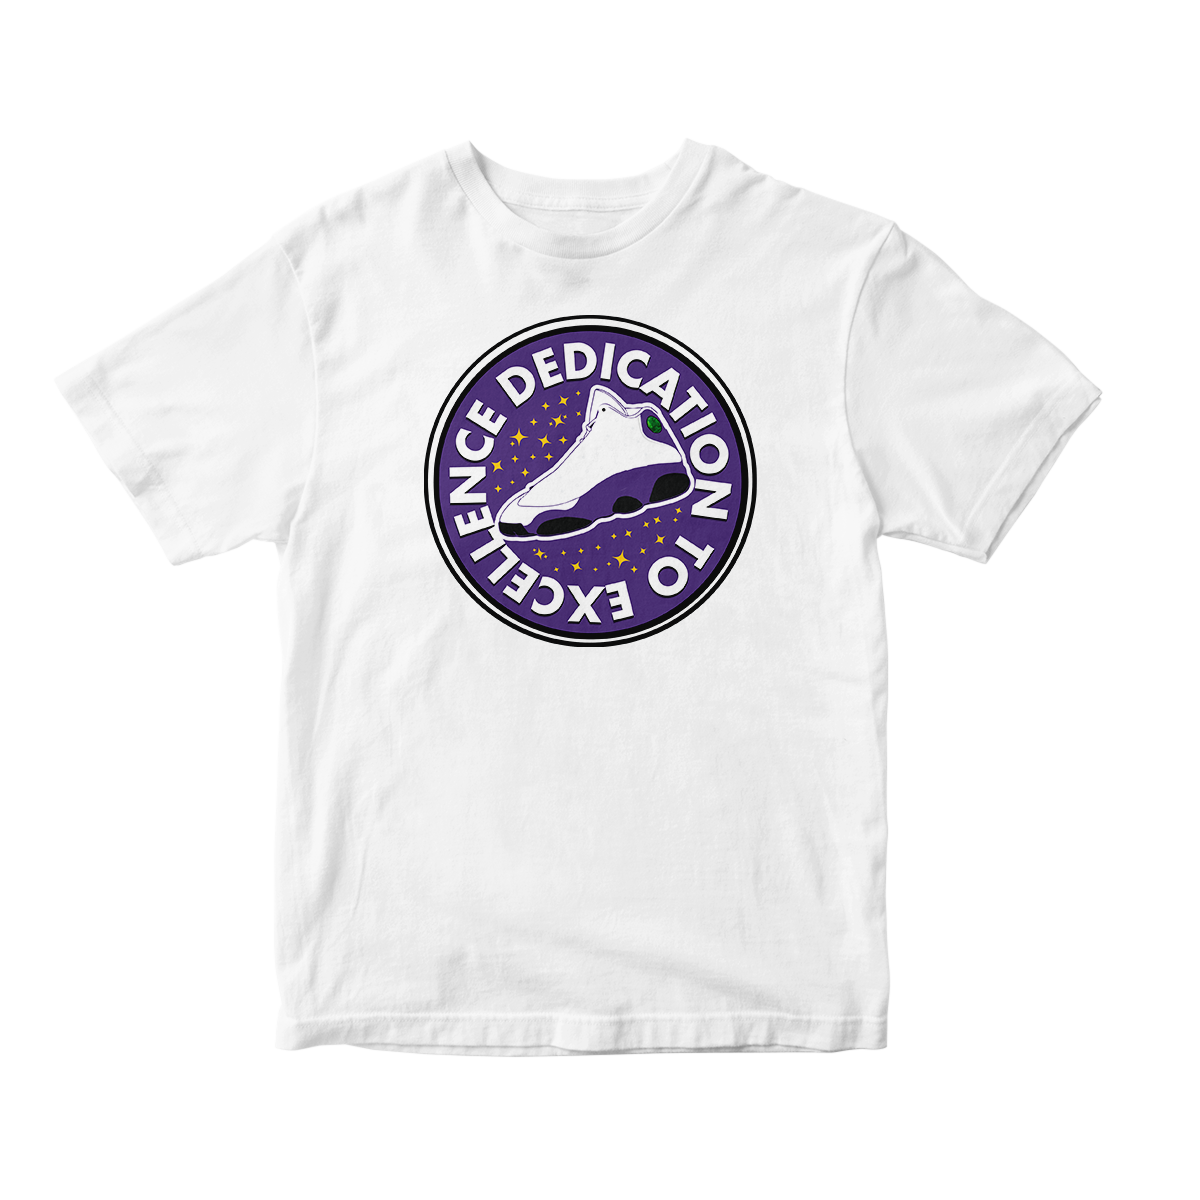 'Dedication To Excellence' in Lakers CW Short Sleeve Tee